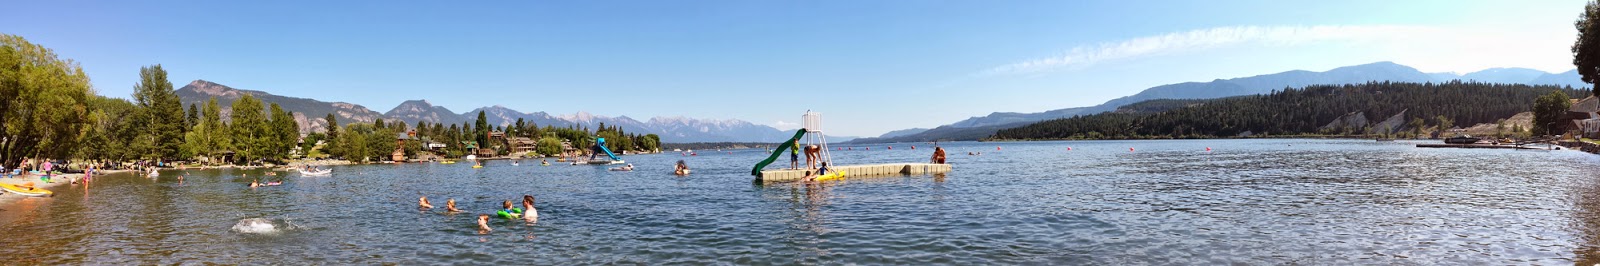 Panorama of Windermere Lake in Invermere, BC